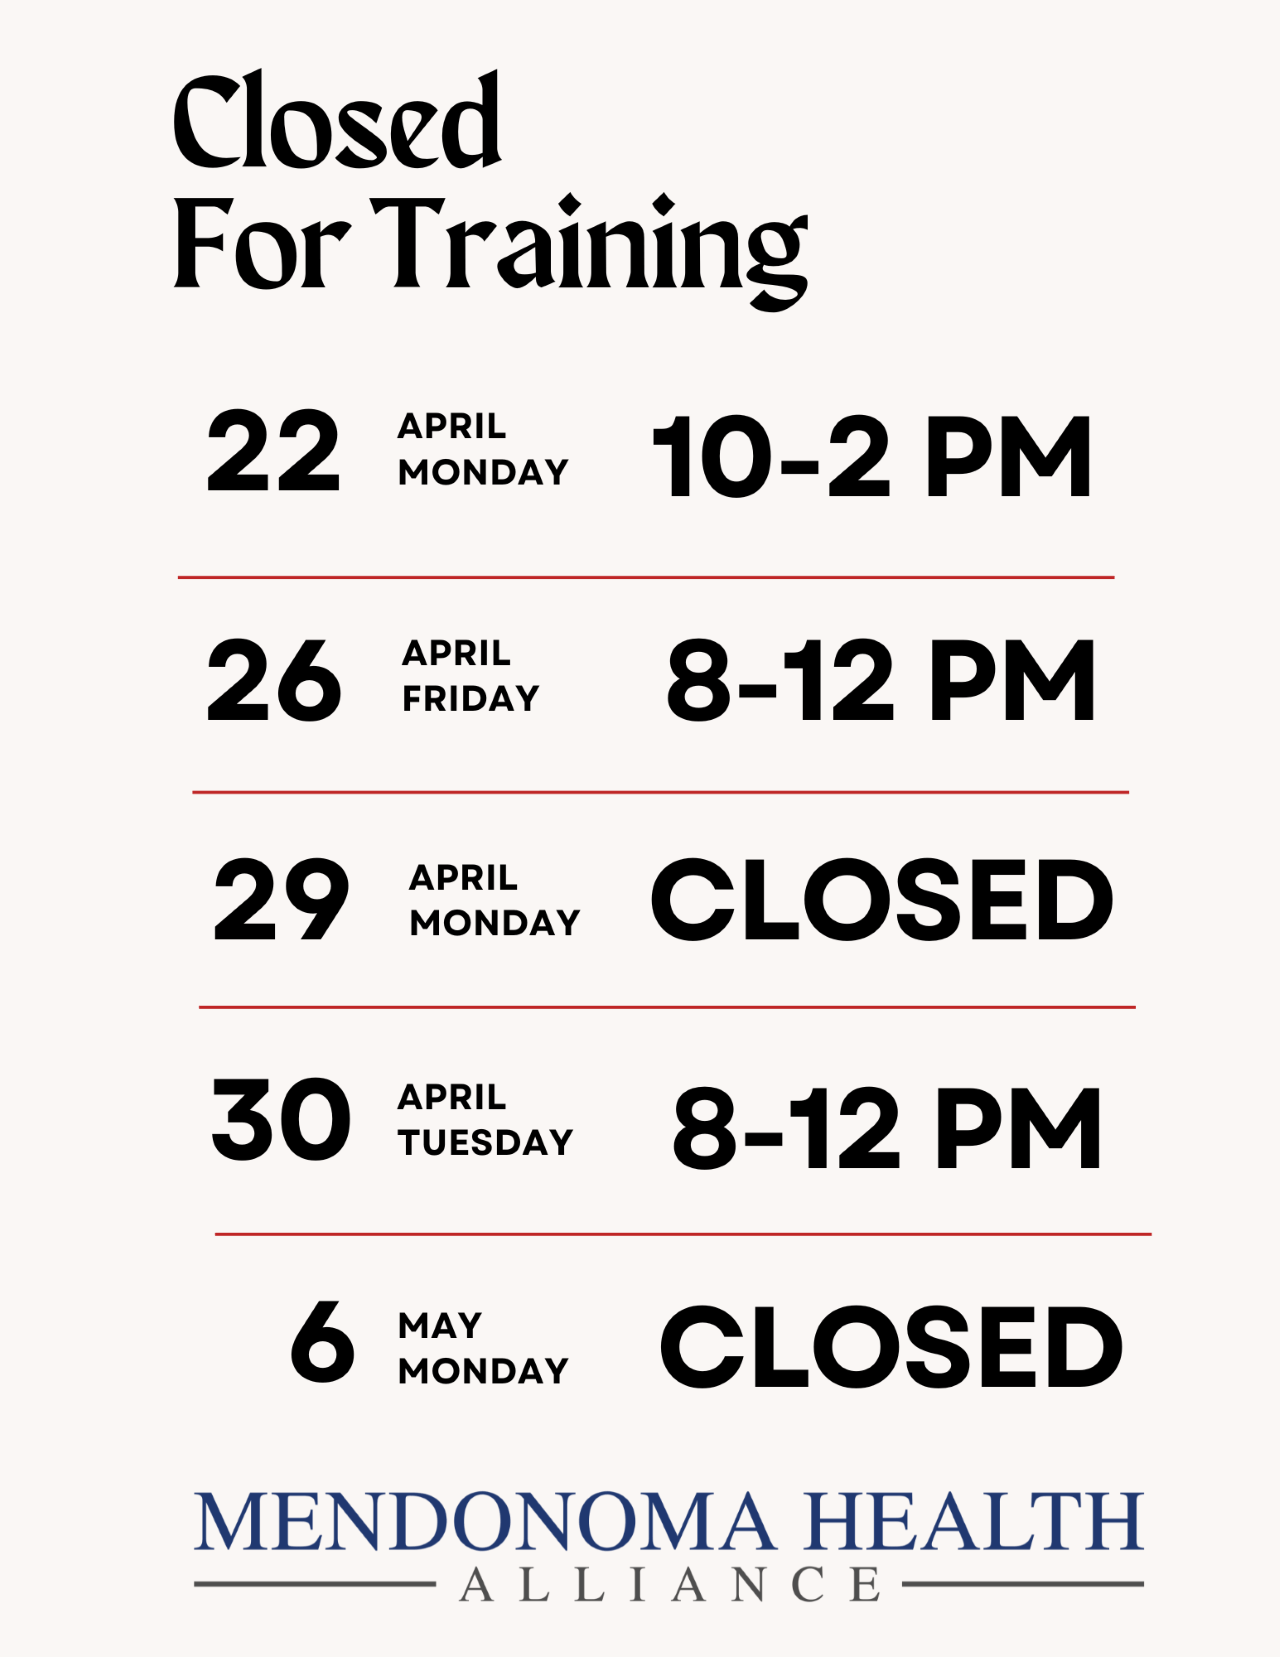 Office Closed for training flyer. Lists the dates, times, and days of the week.